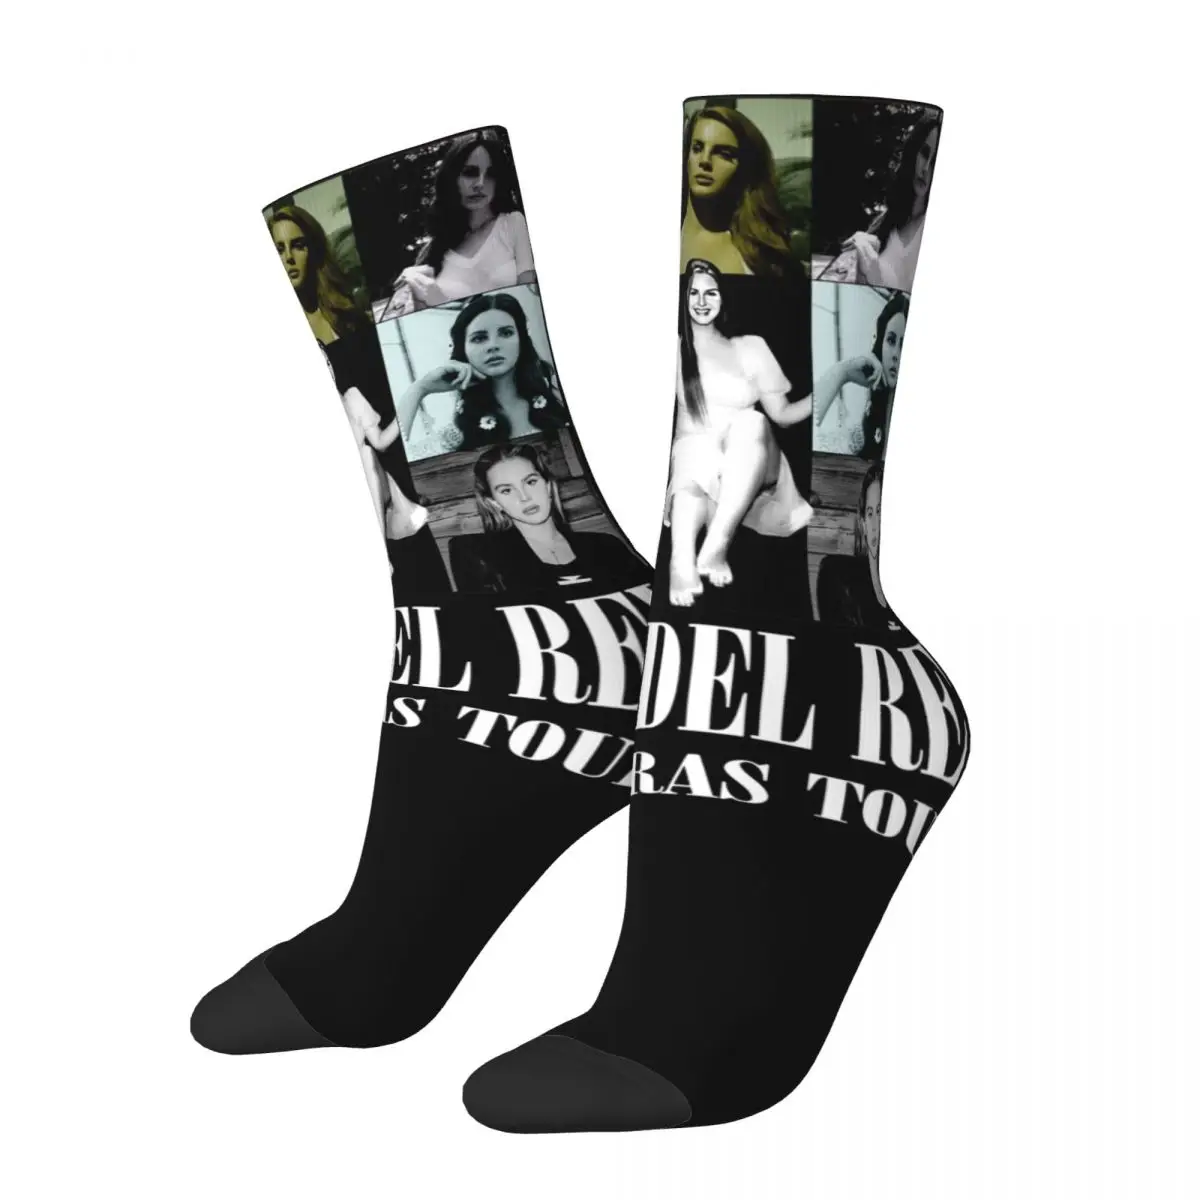 

Lana Del Rey Tour Outfits Socks for Women Men Accessories All Season Comfortable Crew Socks Breathable